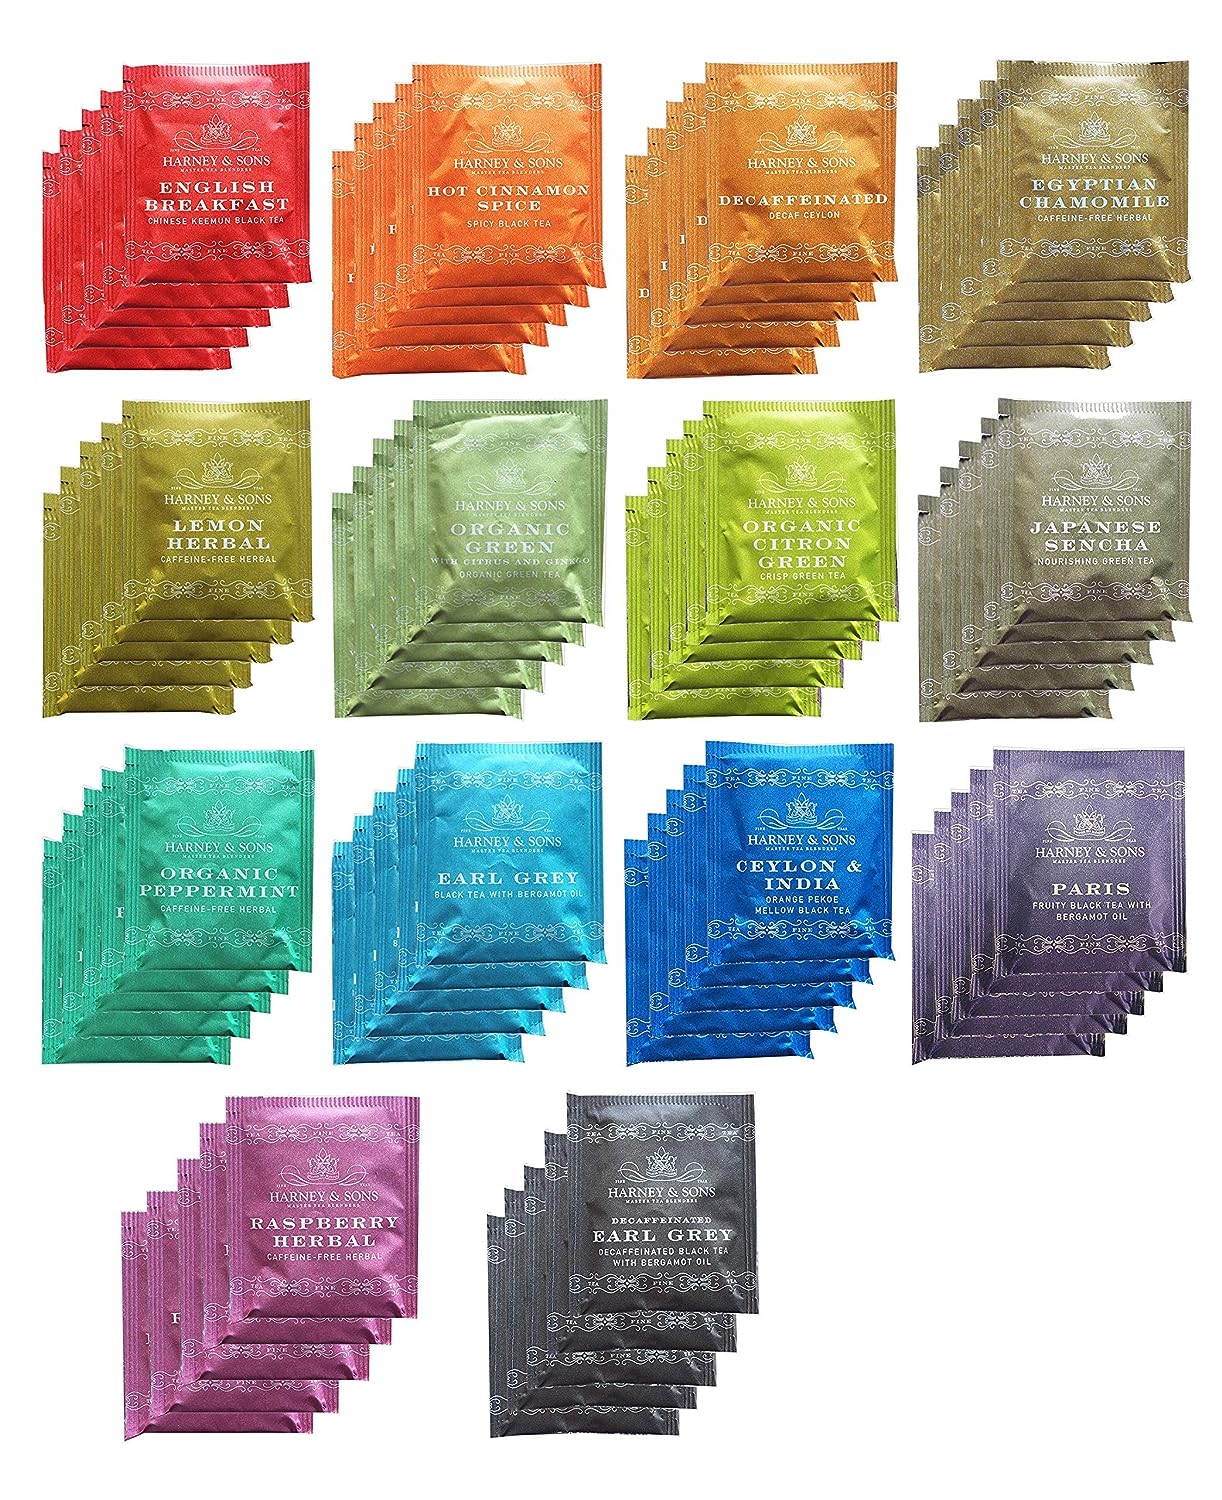 Wholesale prices with free shipping all over United States Harney & Sons Assorted Tea Bag Sampler 42 Count With Honey Crystal Packs Great for Birthday, Hostess and Co-worker Gifts - Steven Deals